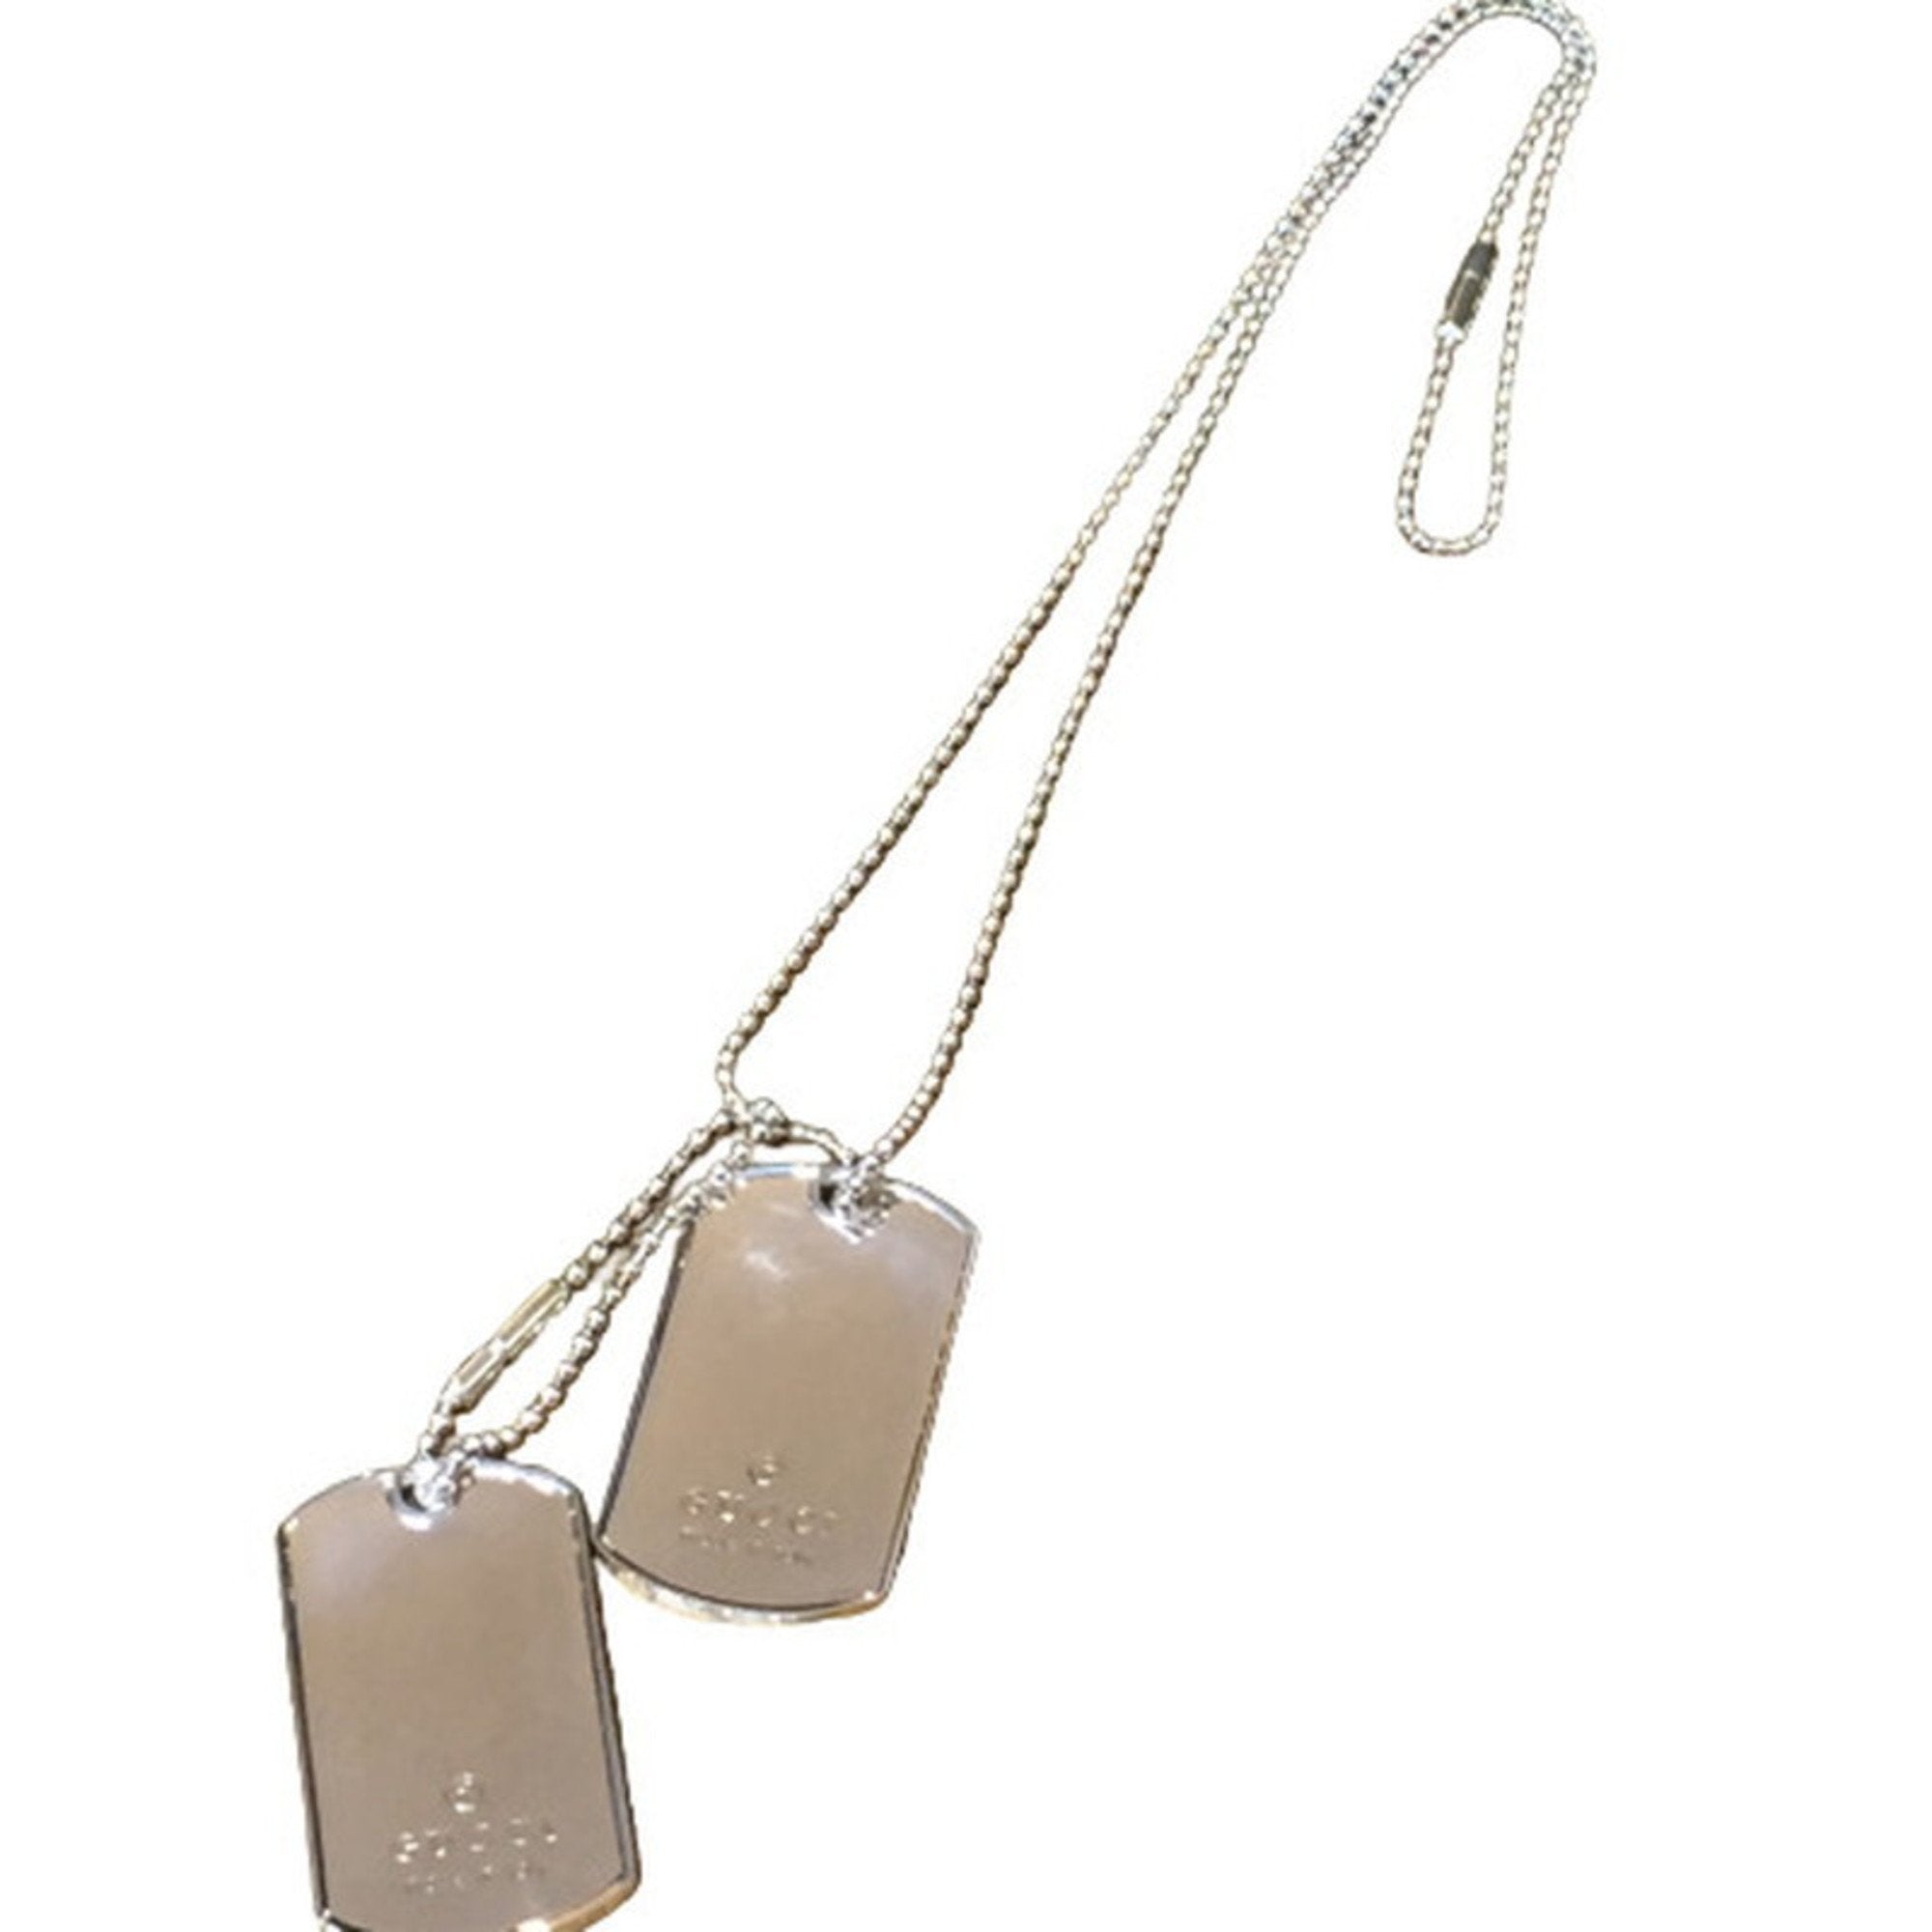 Gucci Dog Tags - 6 For Sale on 1stDibs | gucci silver dog tag, gucci dog  tags for sale, gucci dog tag bracelet